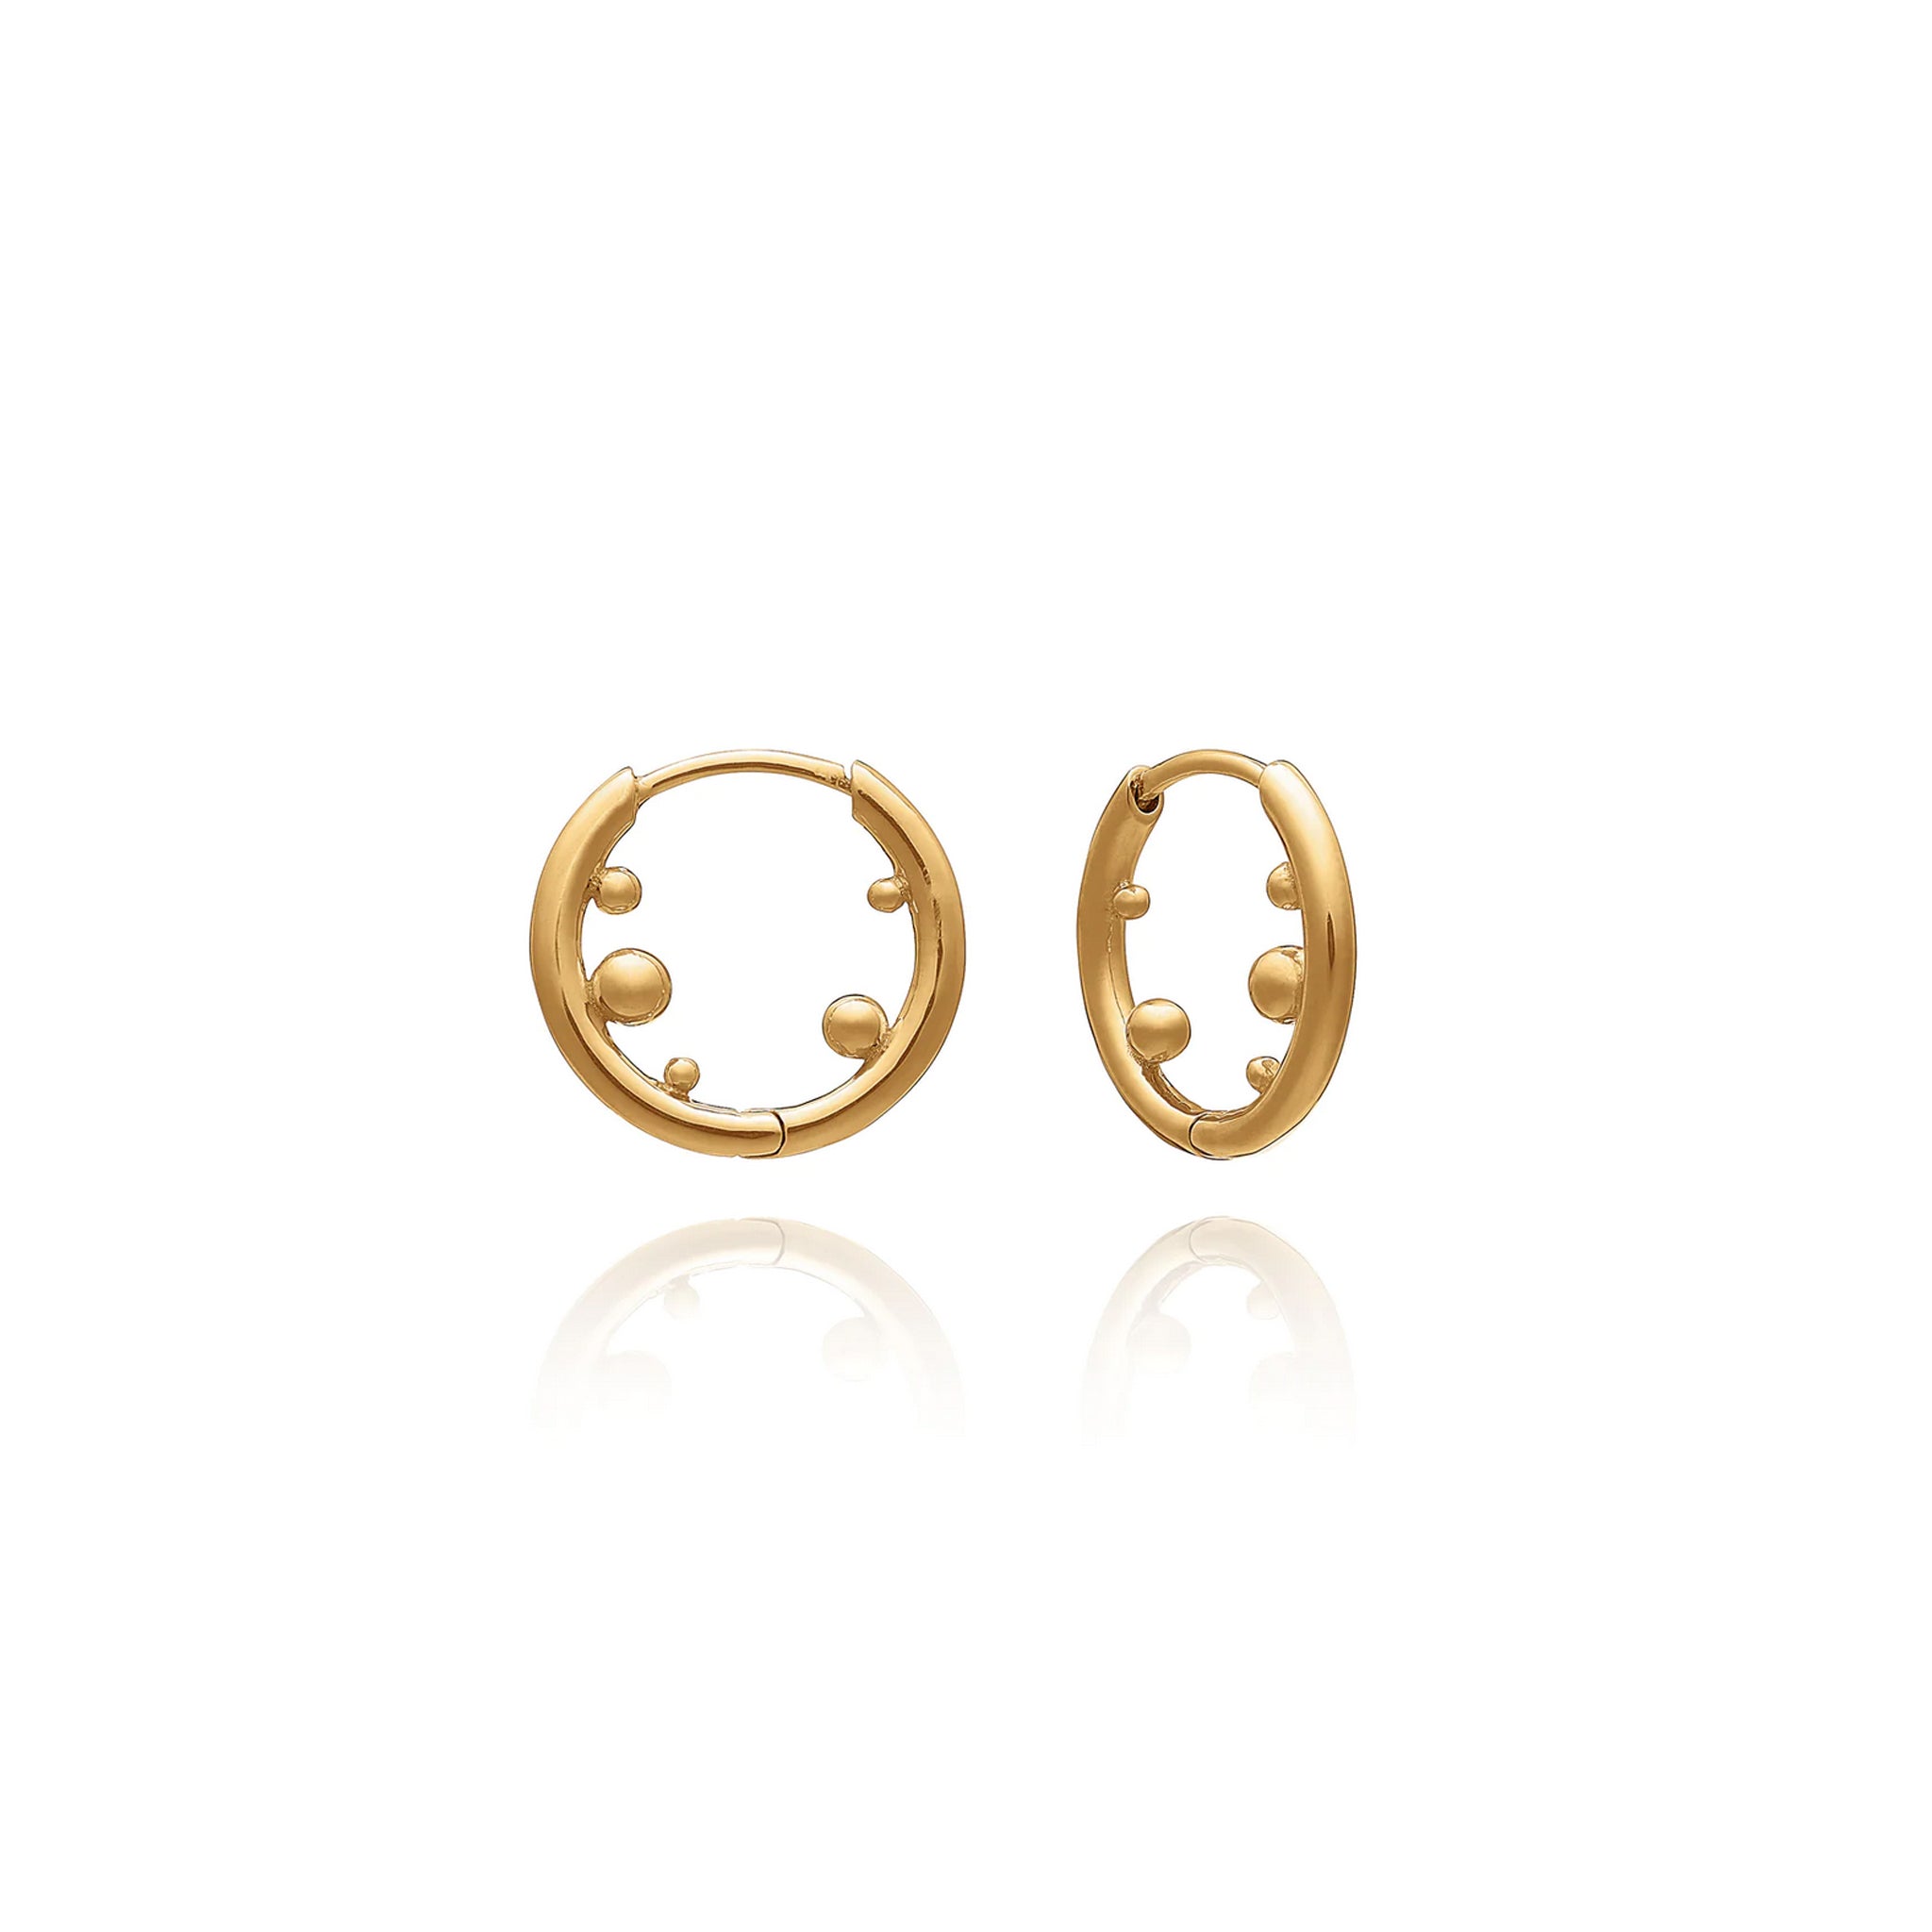 A pair of Stellar Orb Huggie Hoops - Gold by Rachel Jackson London on a white background.